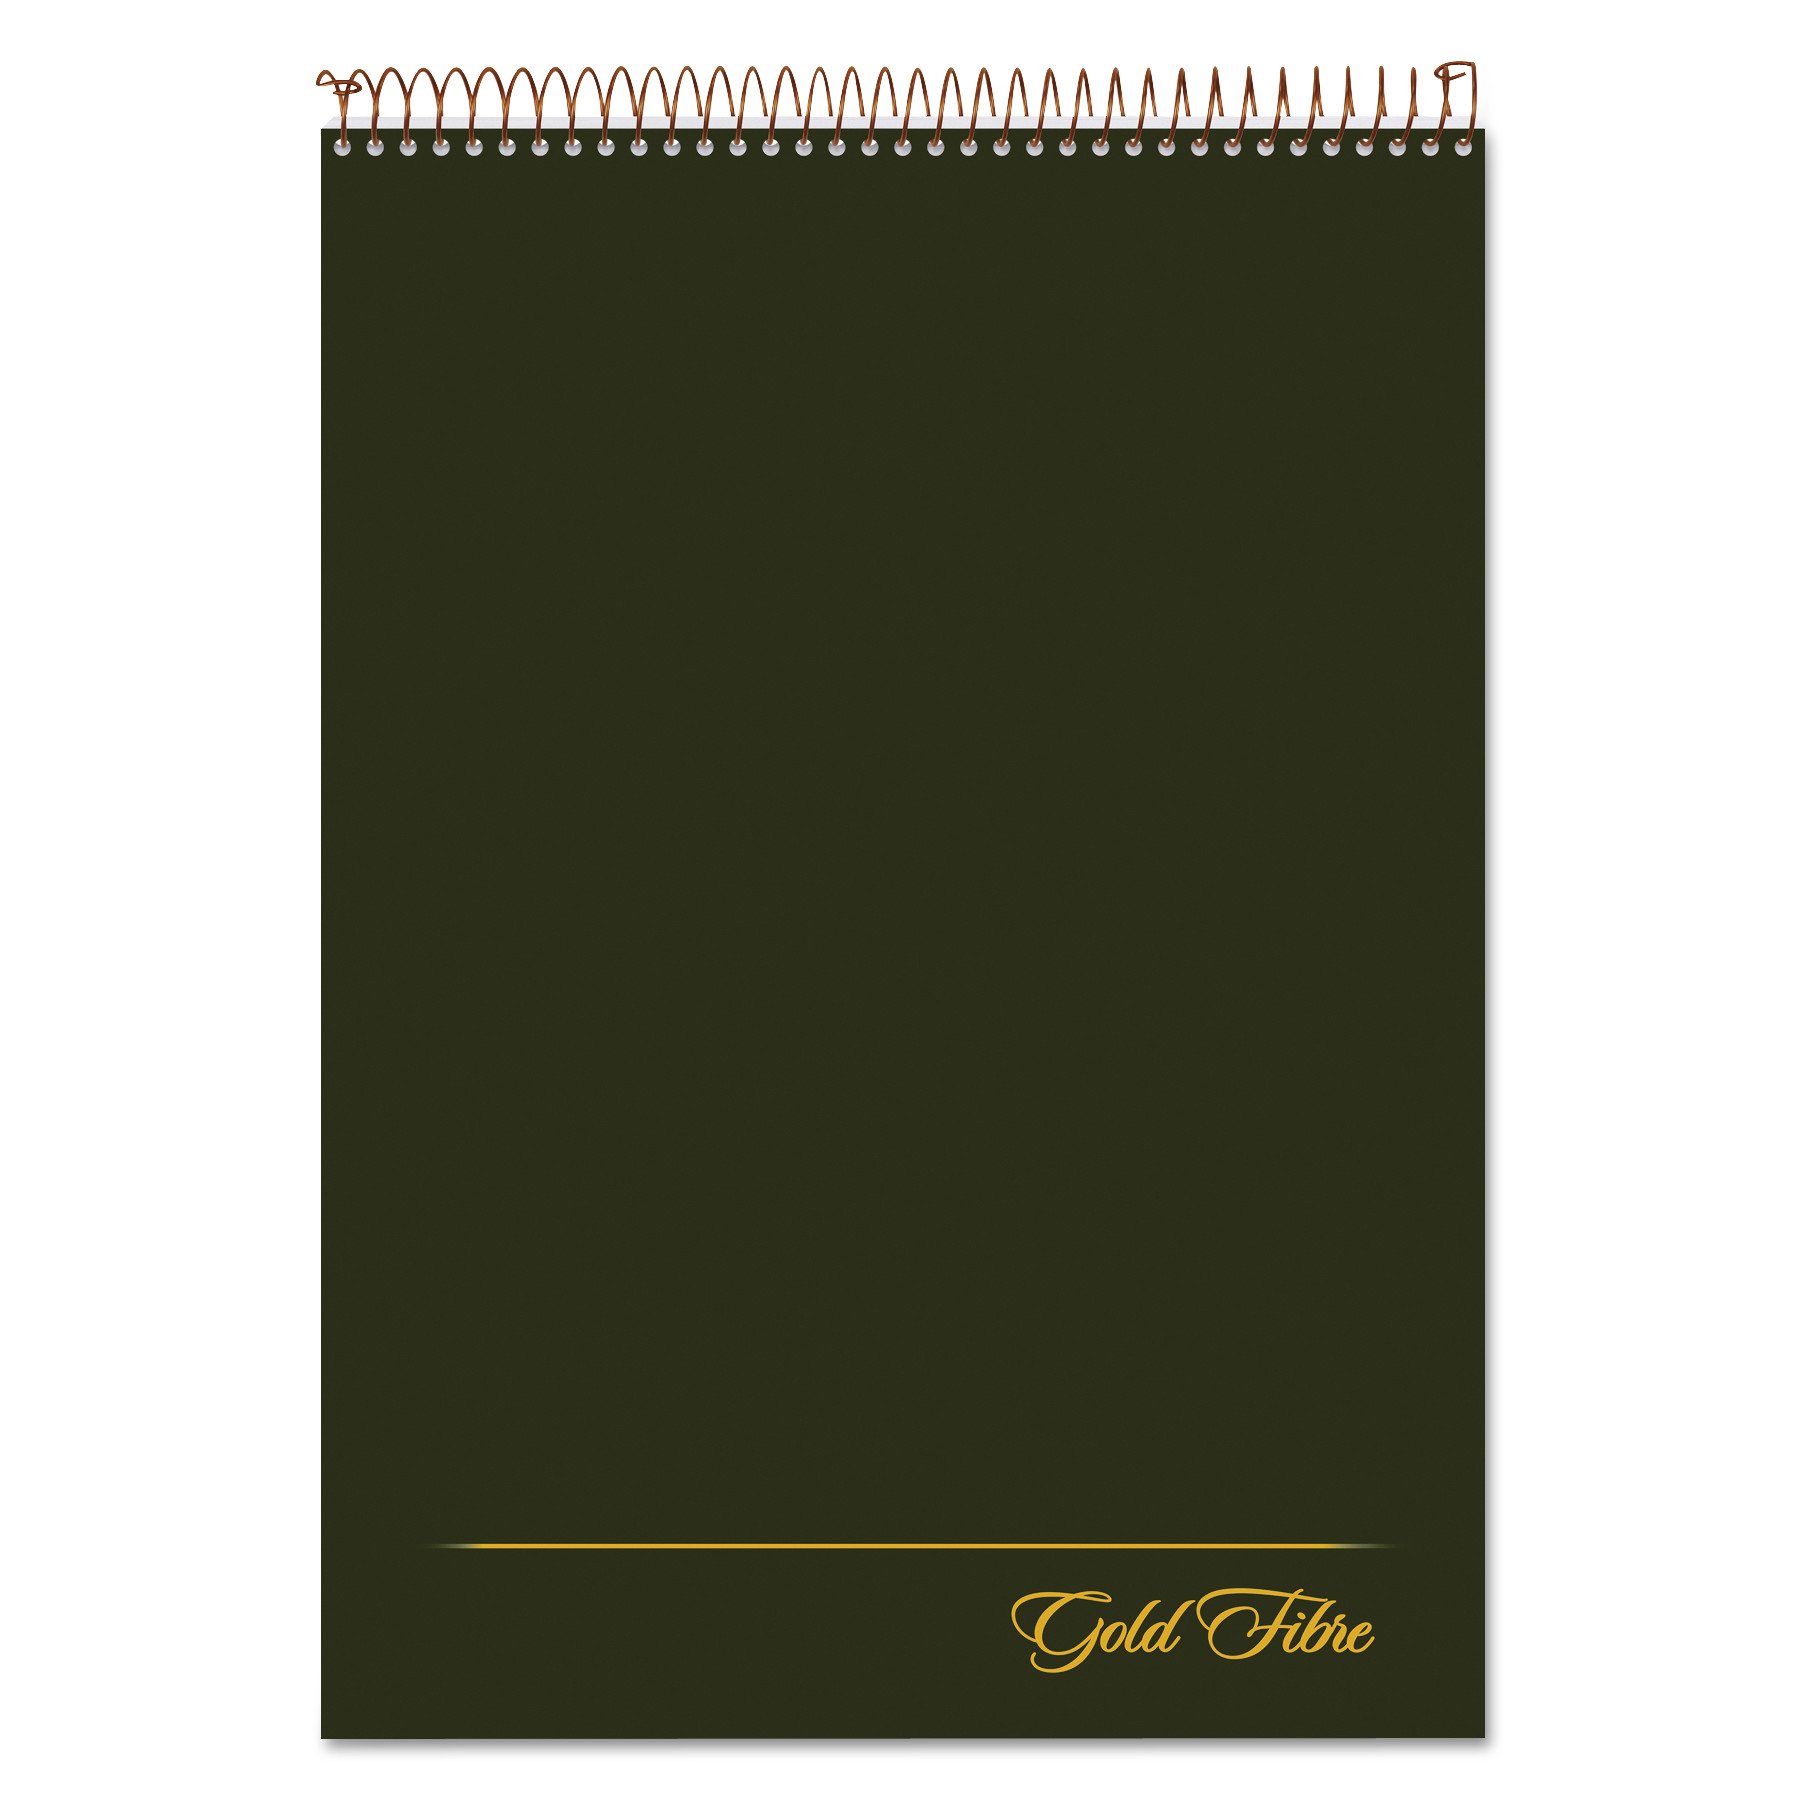  Ampad 20-811 Gold Fibre Wirebound Writing Pad w/ Cover, 1 Subject, Project Notes, Green Cover, 8.5 x 11.75, 70 Sheets (TOP20811) 